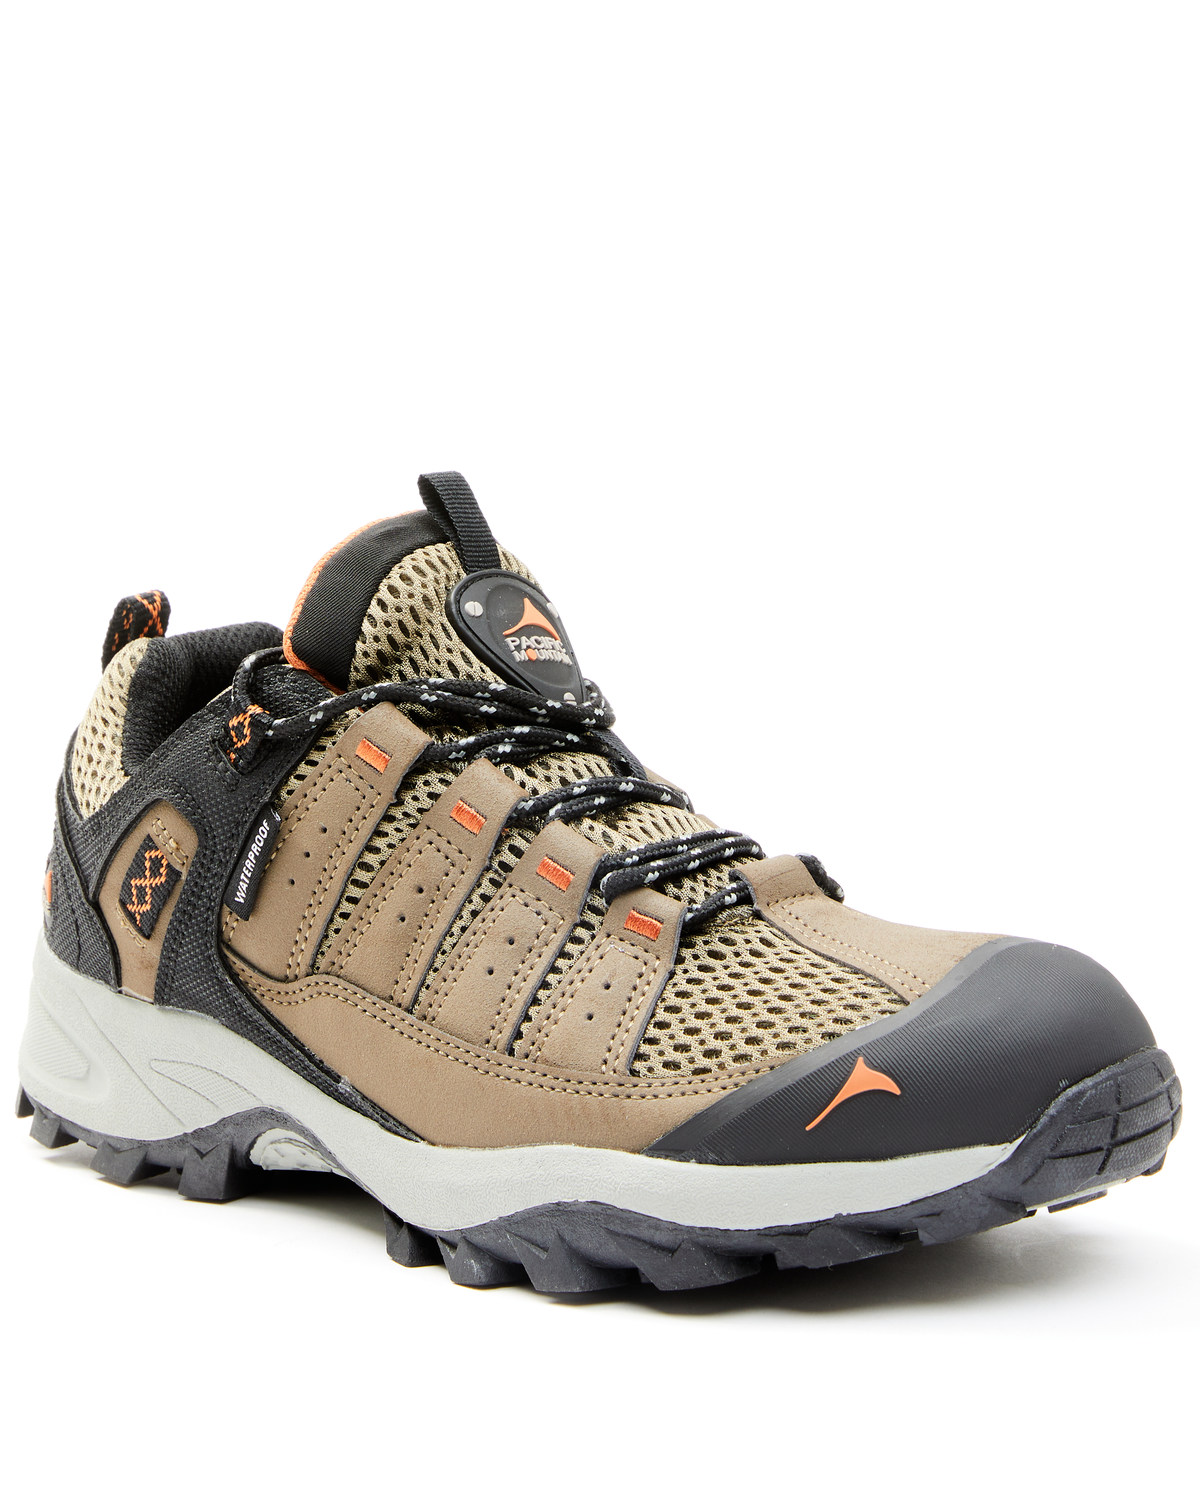 Pacific Mountain Men's Coosa Waterproof Hiking Boots - Soft Toe